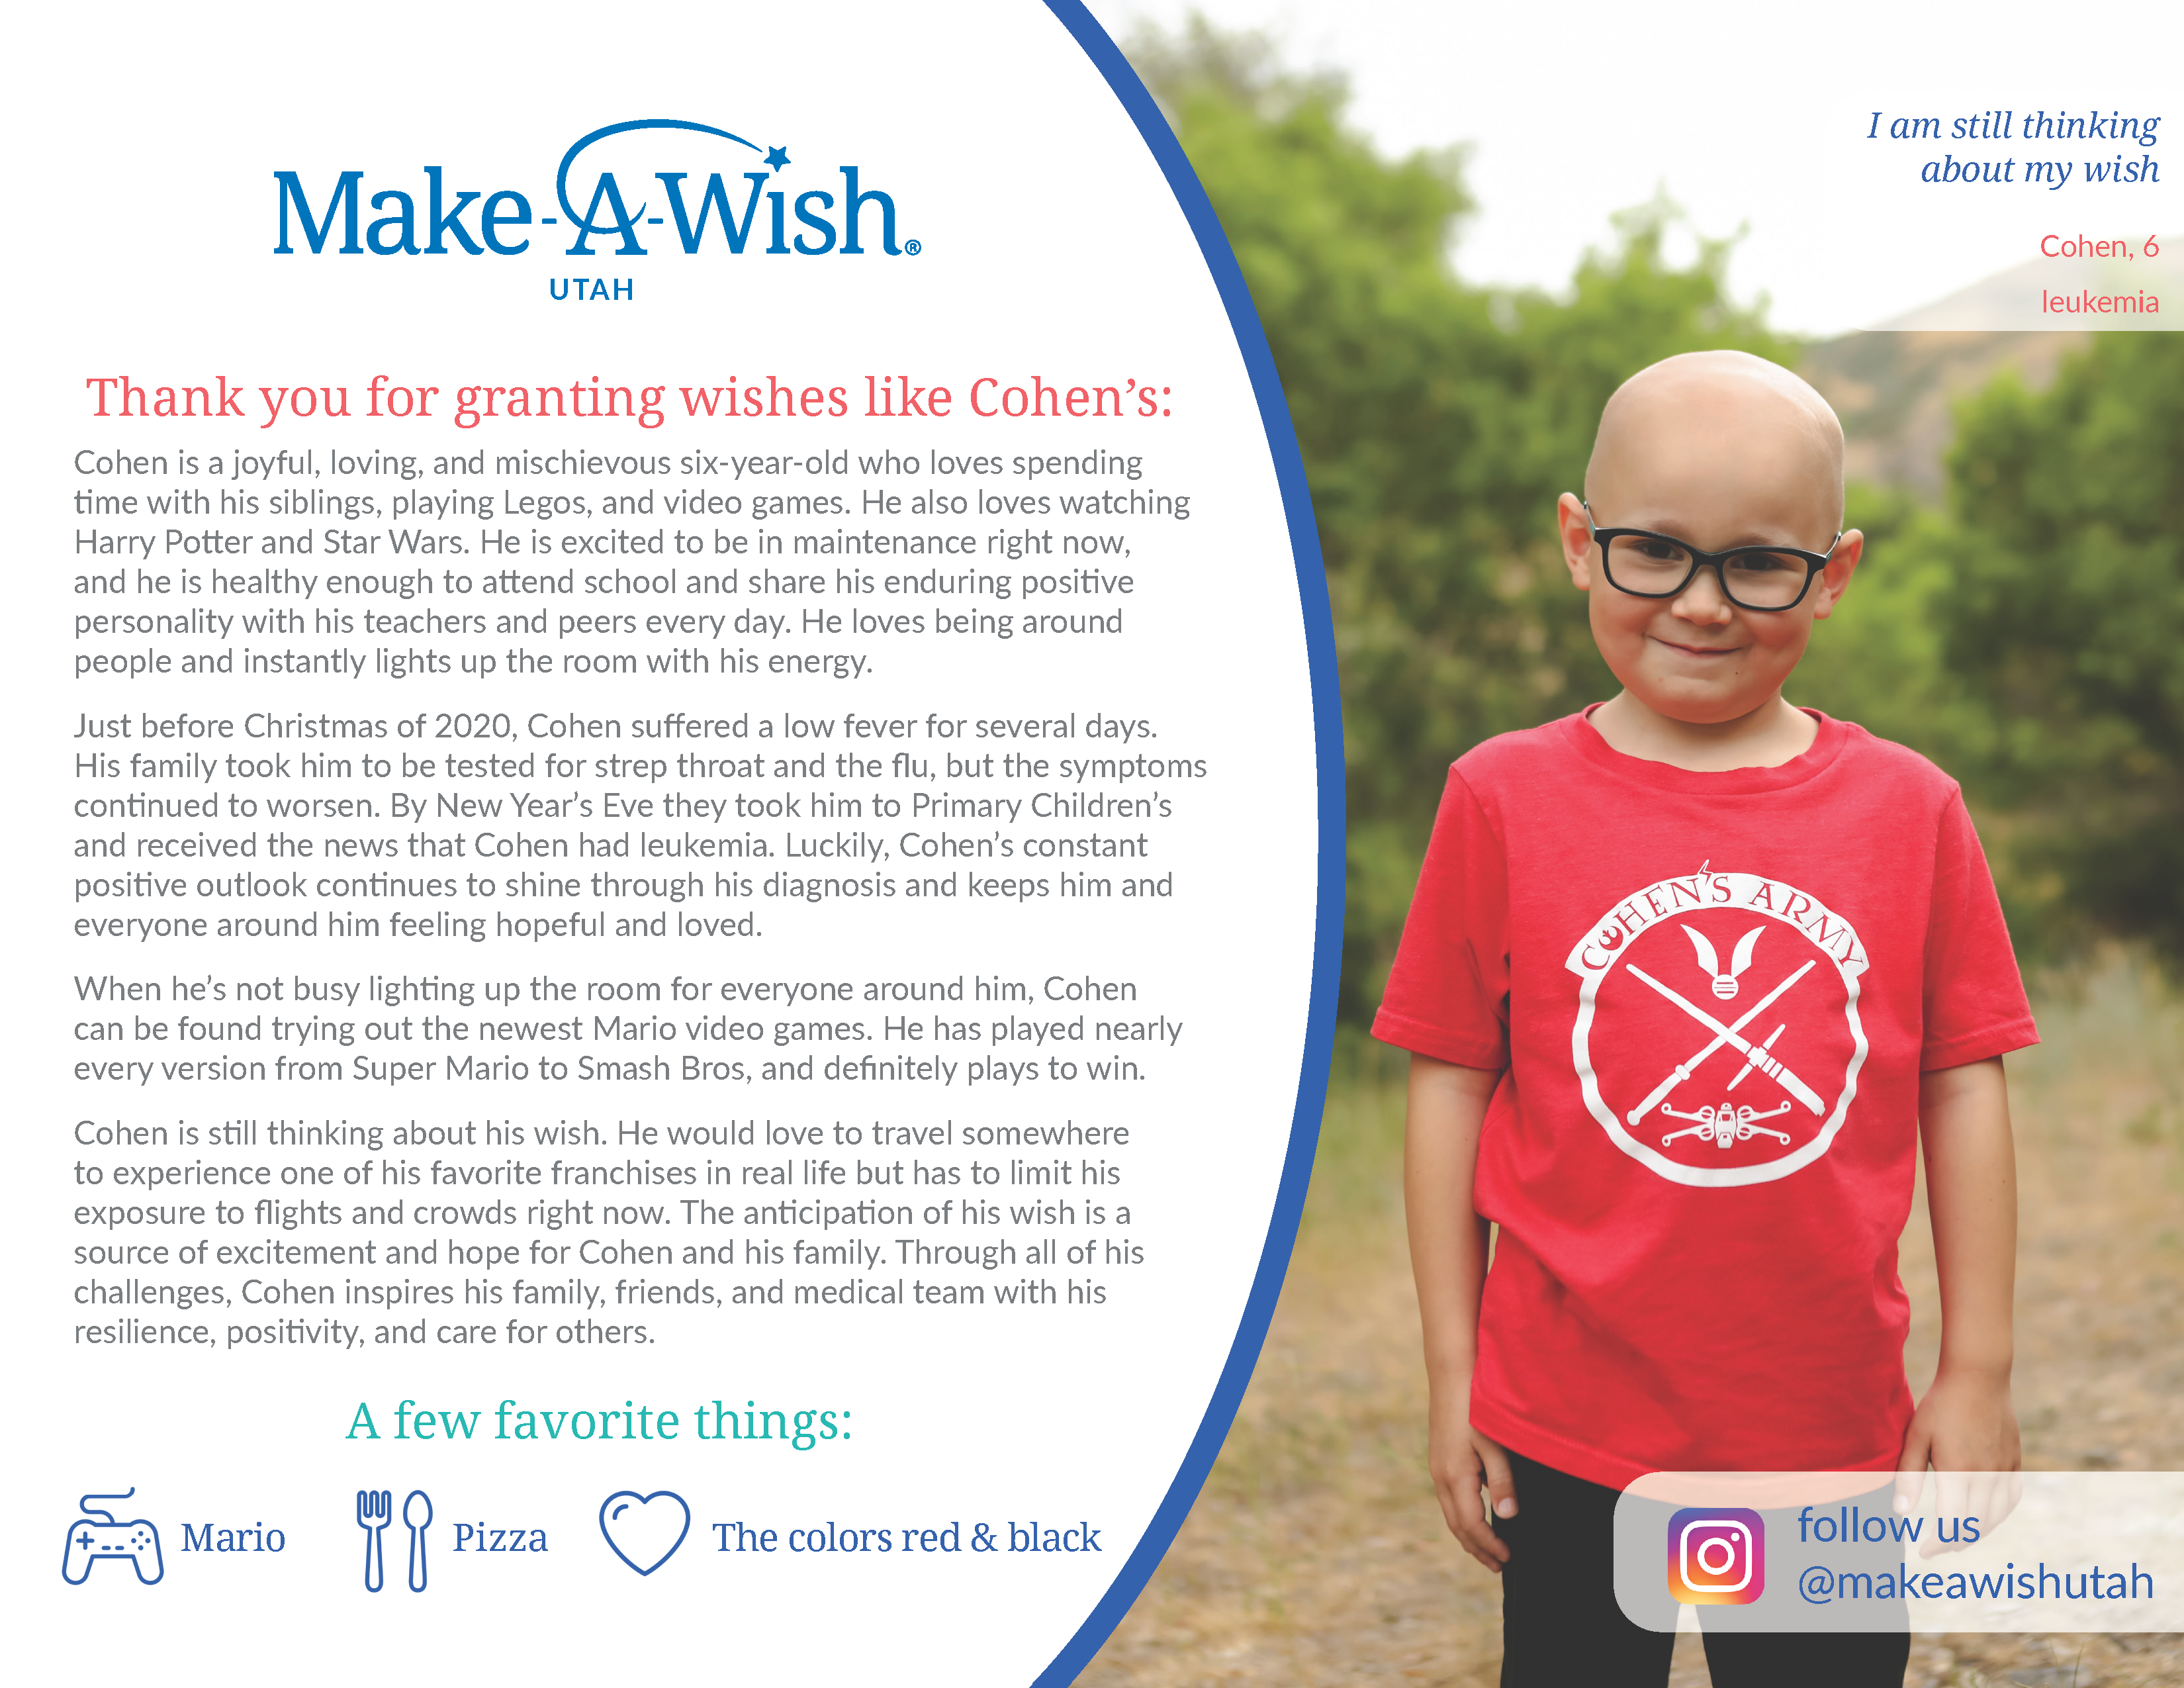 DFMS is raising money for Make-A-Wish, this is the Bio for Cohen.